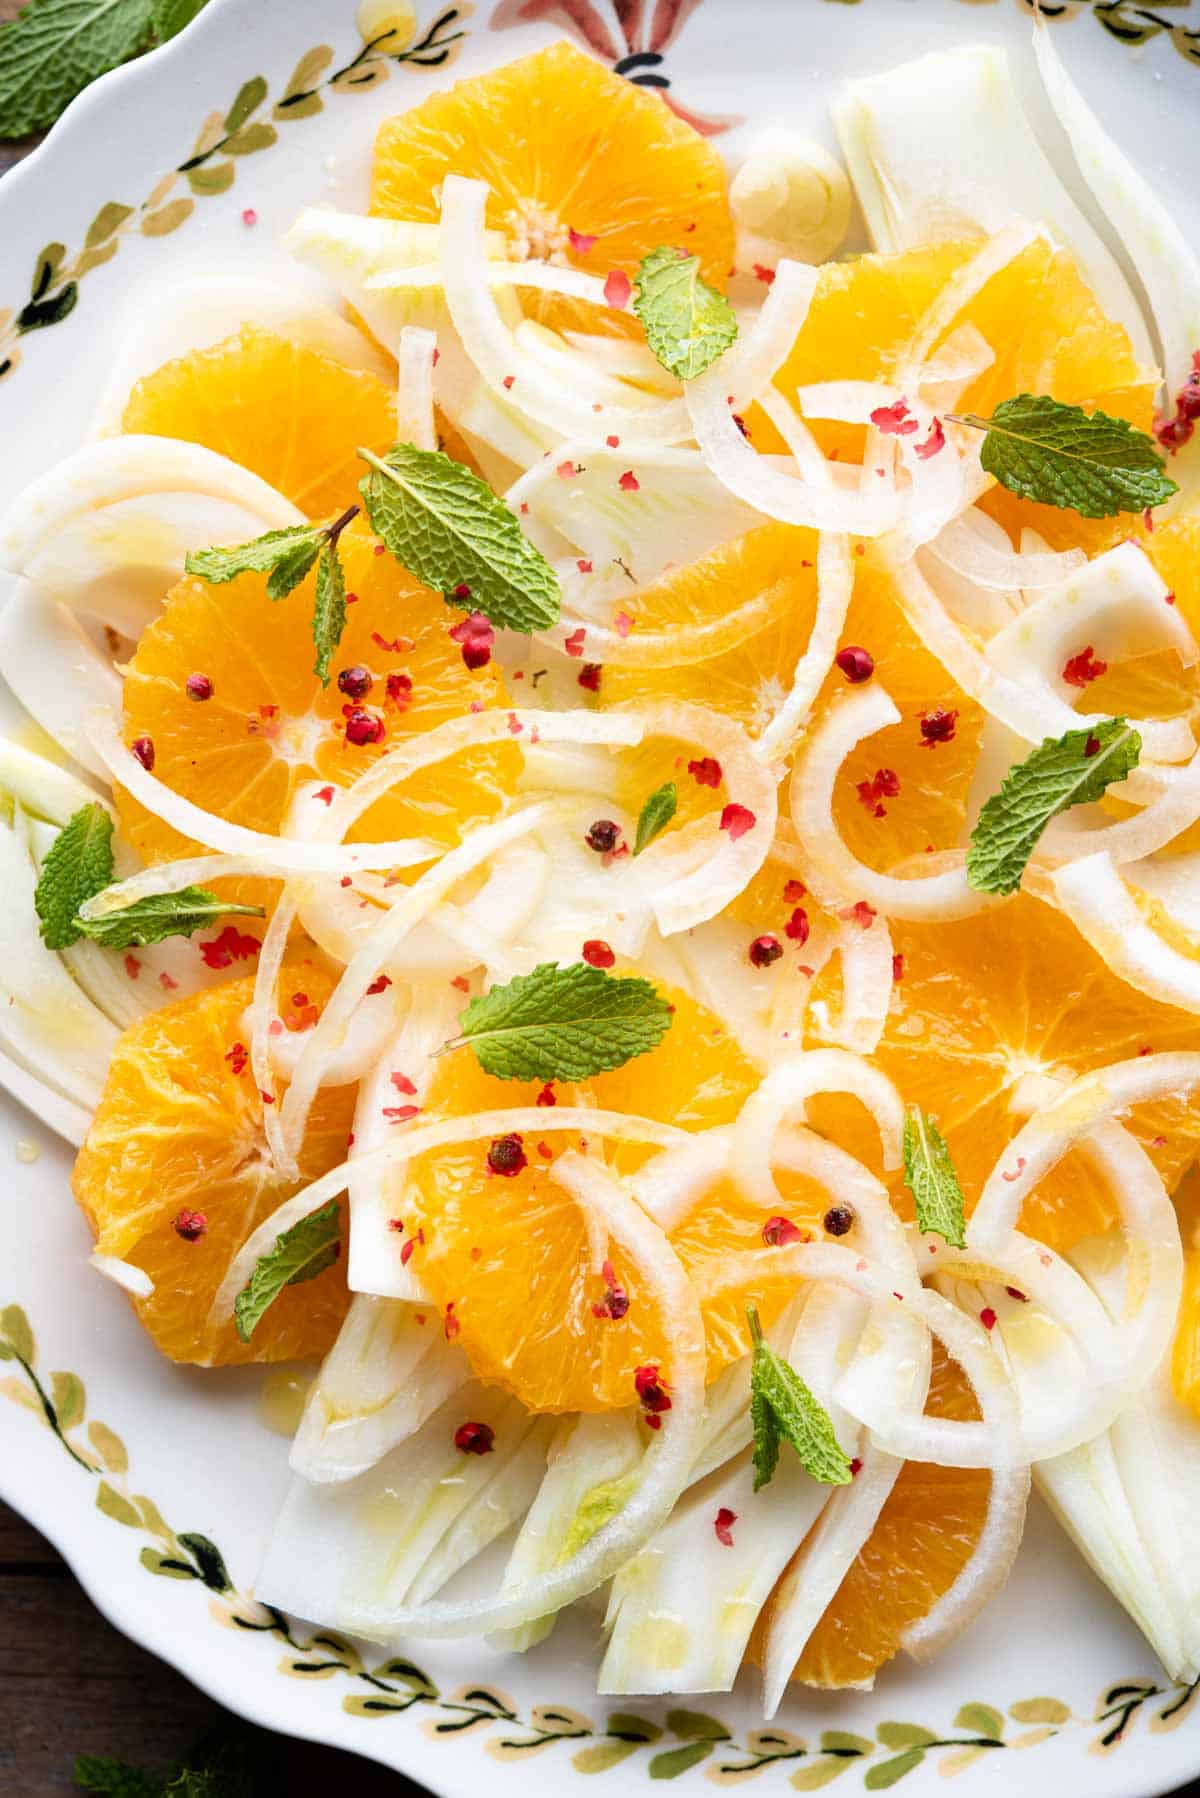 A close up of a fennel orange salad with white onion, mint leaves and pink peppercorns.